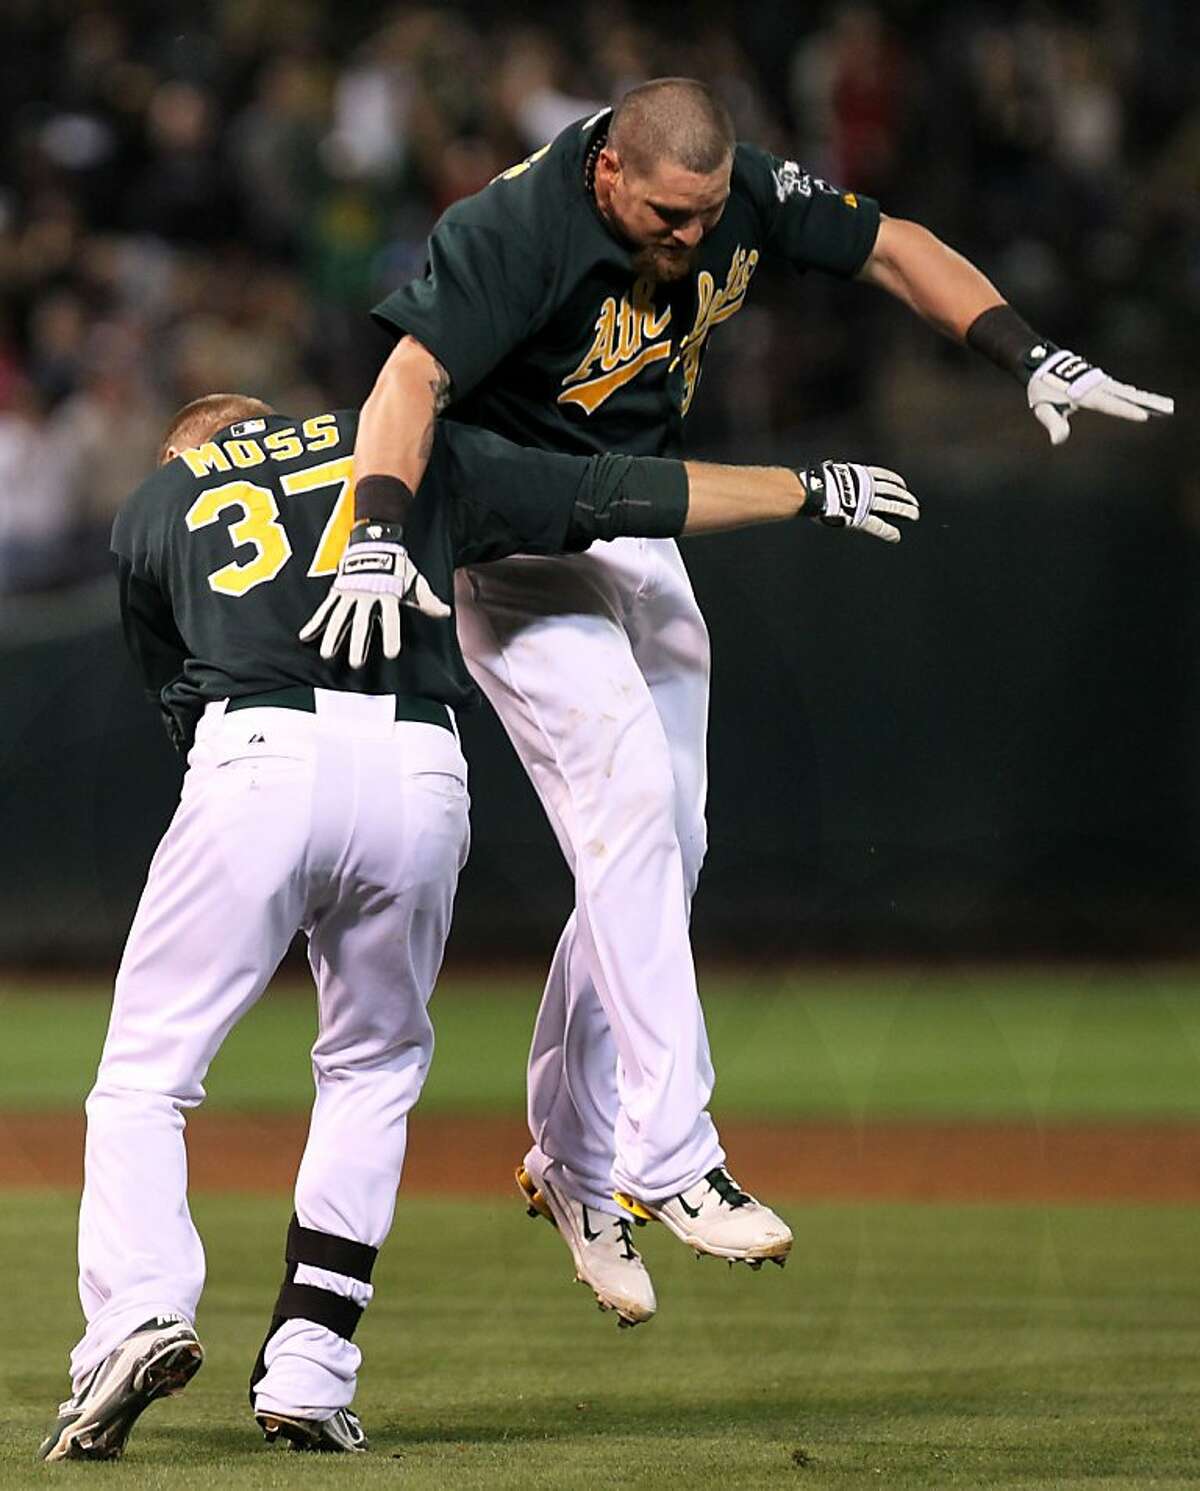 Oakland Athletics Brandon Moss celebrates his walk-off base hit that scored the A's winning run with teammate Jonny Gomes in the 9th inning of their MLB baseball game with the New York Yankees in Oakland Calif., Friday, July 20, 2012.